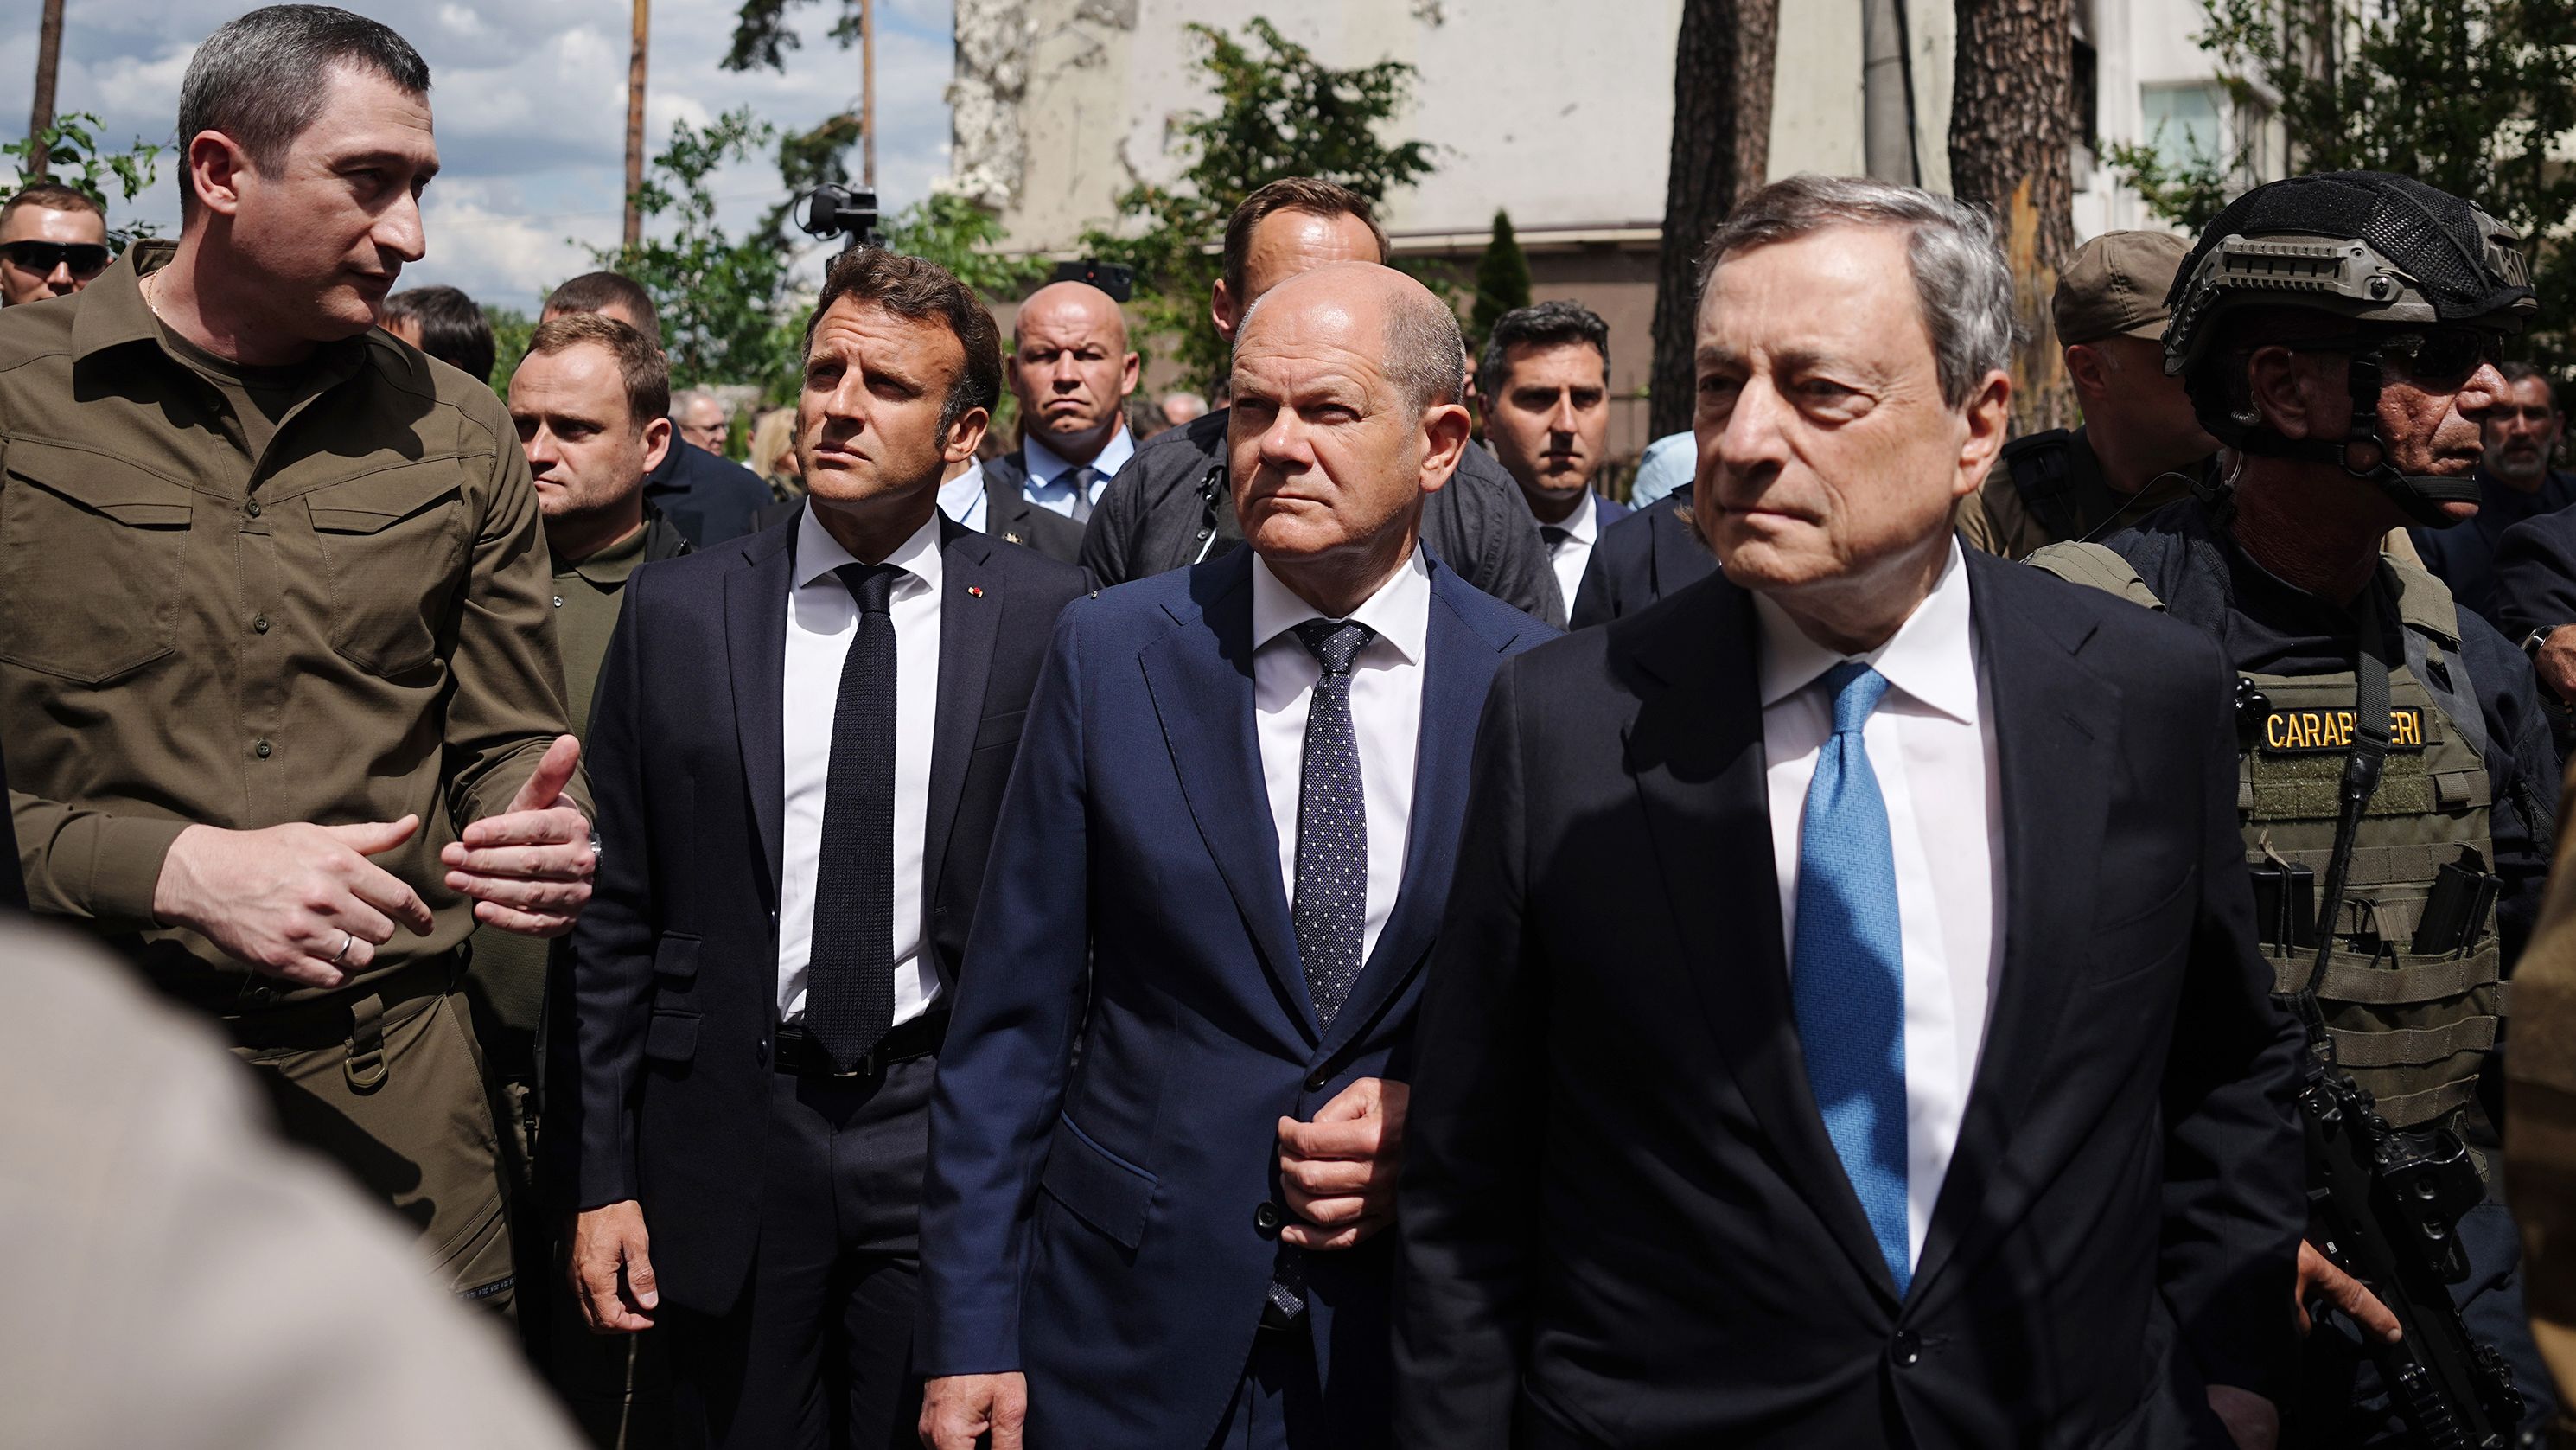 Oleksiy Chernyshov, Ukrainian President Zelensky's special envoy for EU accession, walks with <a href="https://edition.cnn.com/europe/live-news/russia-ukraine-war-news-06-16-22/h_ec3d0a0d6321a9206f39ebce9e1d255f" target="_blank">French President Emmanuel Macron, German Chancellor Olaf Scholz and Italian PM Mario Draghi</a> past destroyed buildings in Irpin, Ukraine, on June 16.